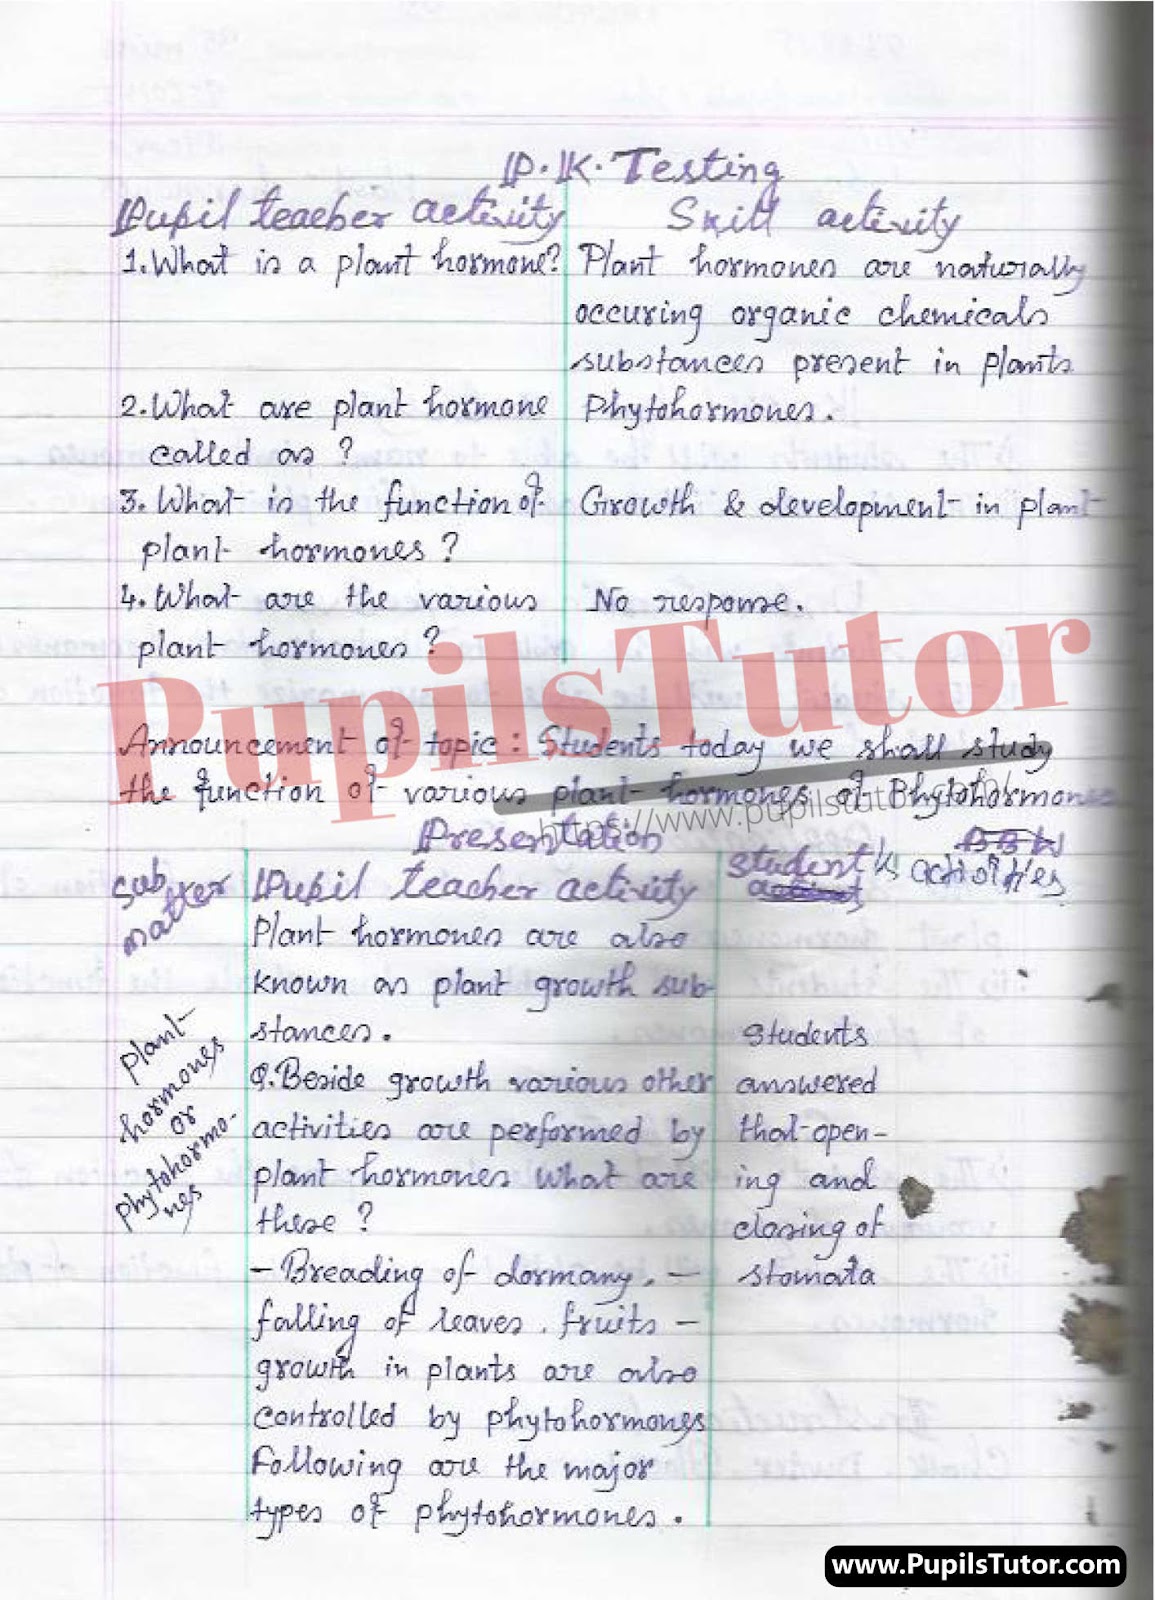 Mega Teaching Skill Phytohormones Lesson Plan For B.Ed And D.el.ed In English Medium Free Download PDF And PPT (Power Point Presentation And Slides) – (Page And Image Number 2) – PupilsTutor